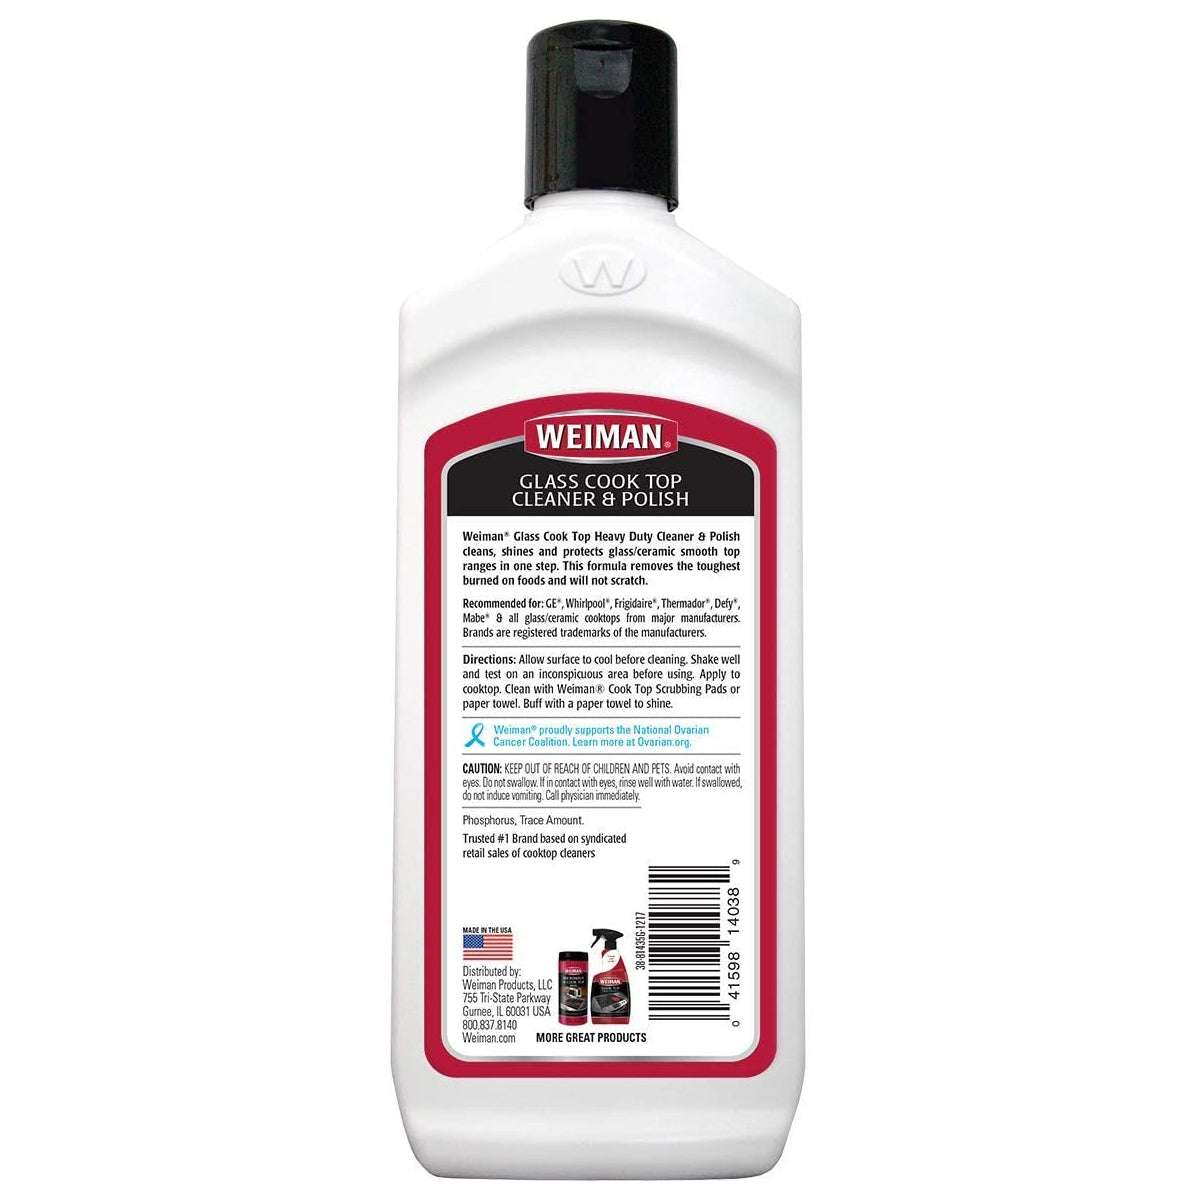 Weiman 38 Glass Cook Top Cleaner & Polish, 10 Oz